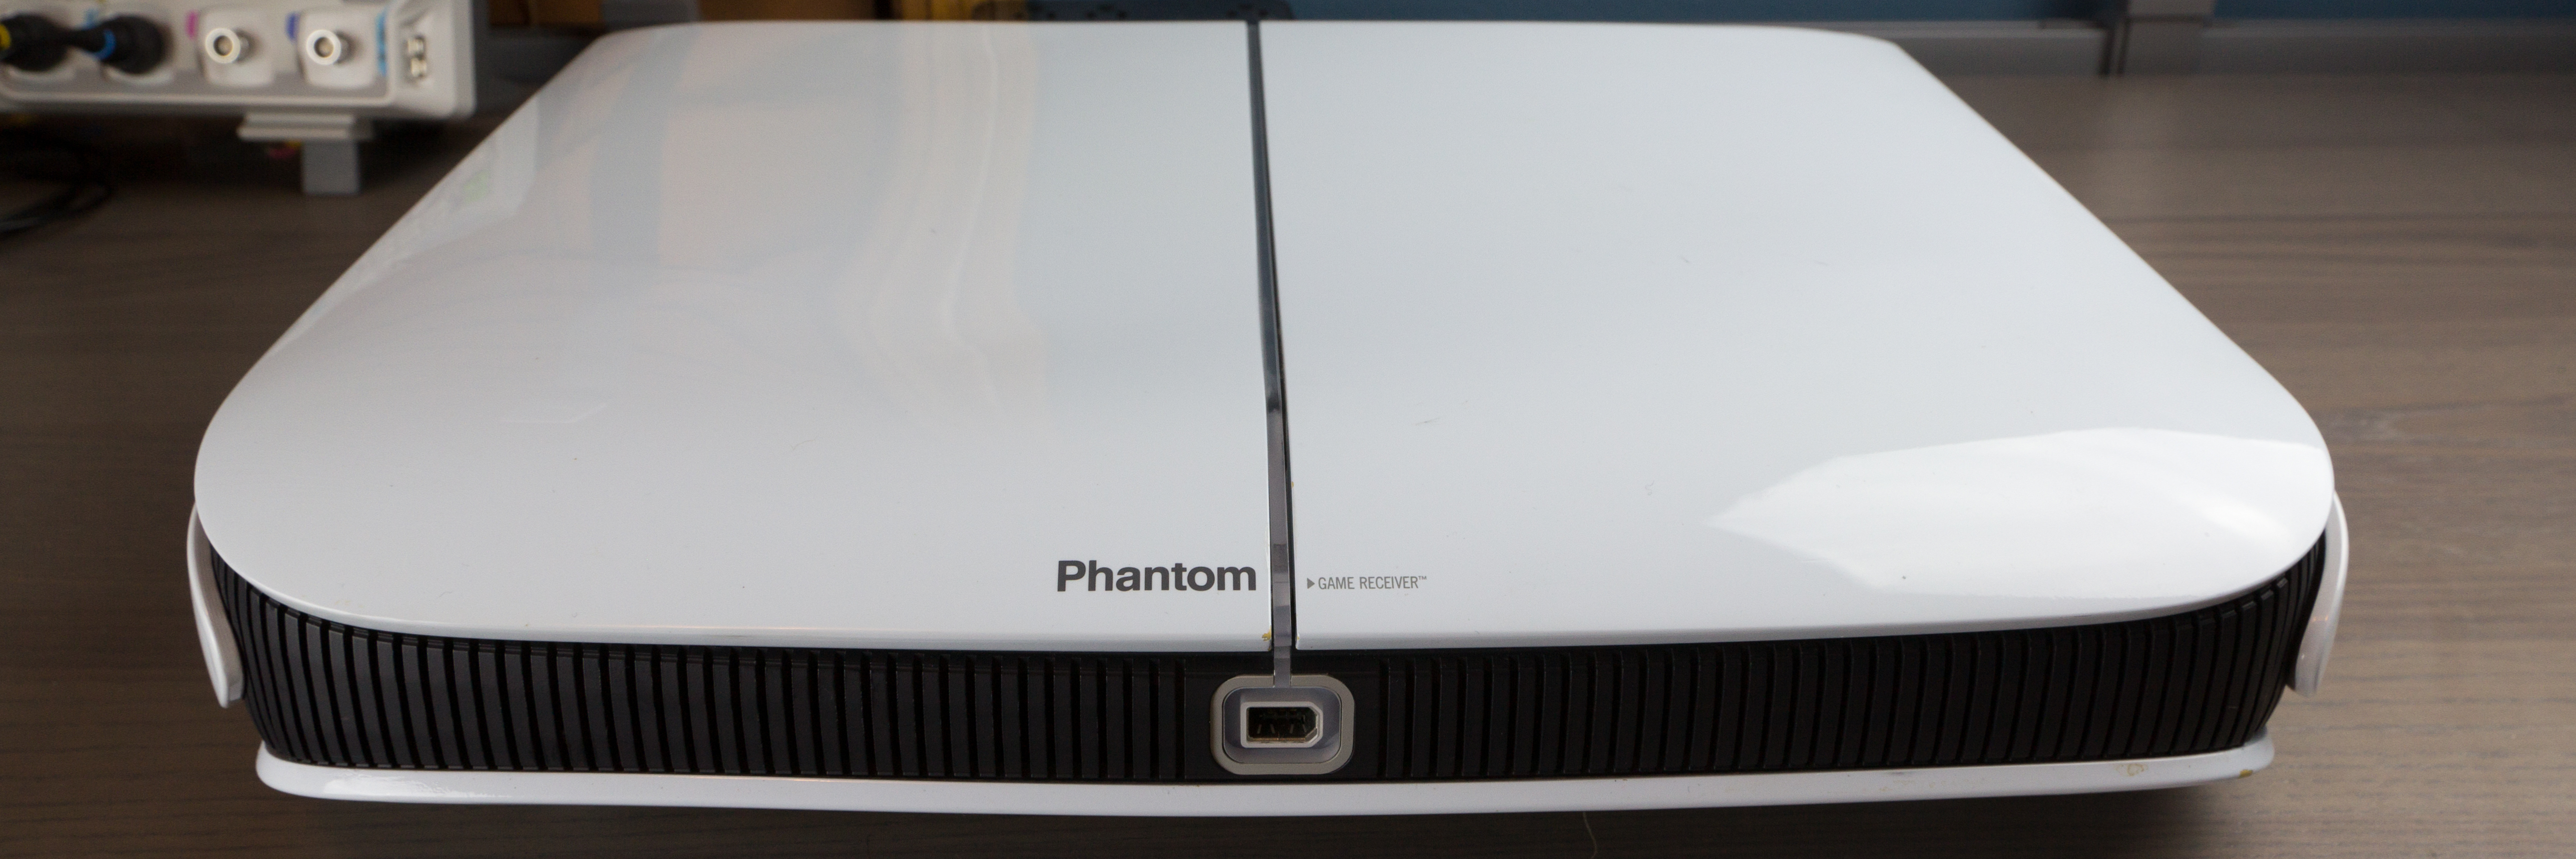 A Close Look at the Never Released Infinium Labs Phantom Video ...